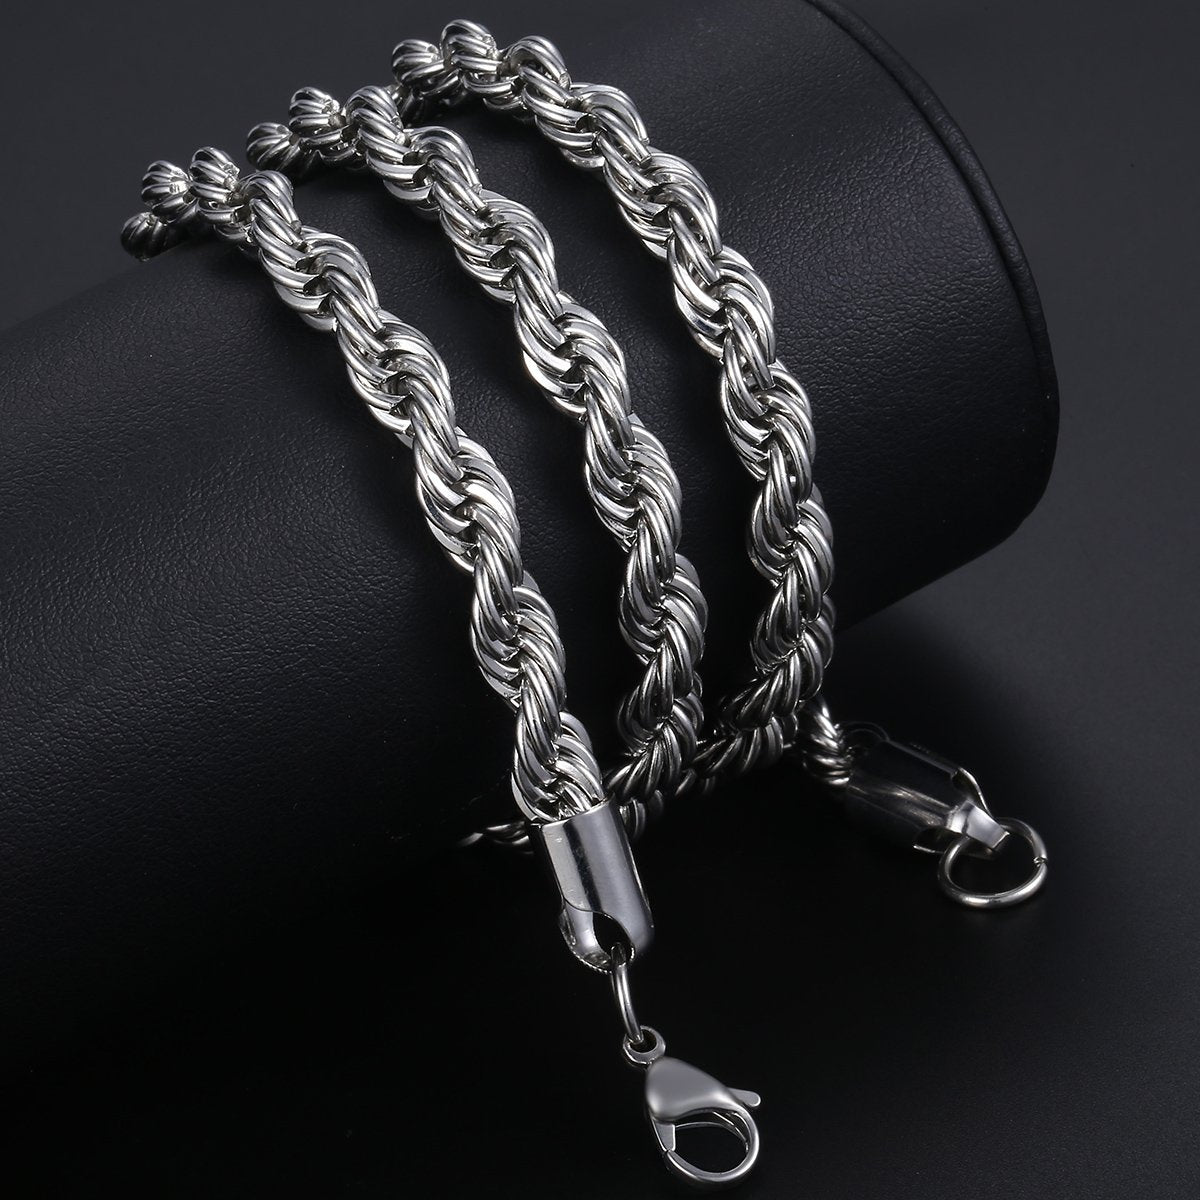 6mm stainless steel rope neck chain for men online in pakistan